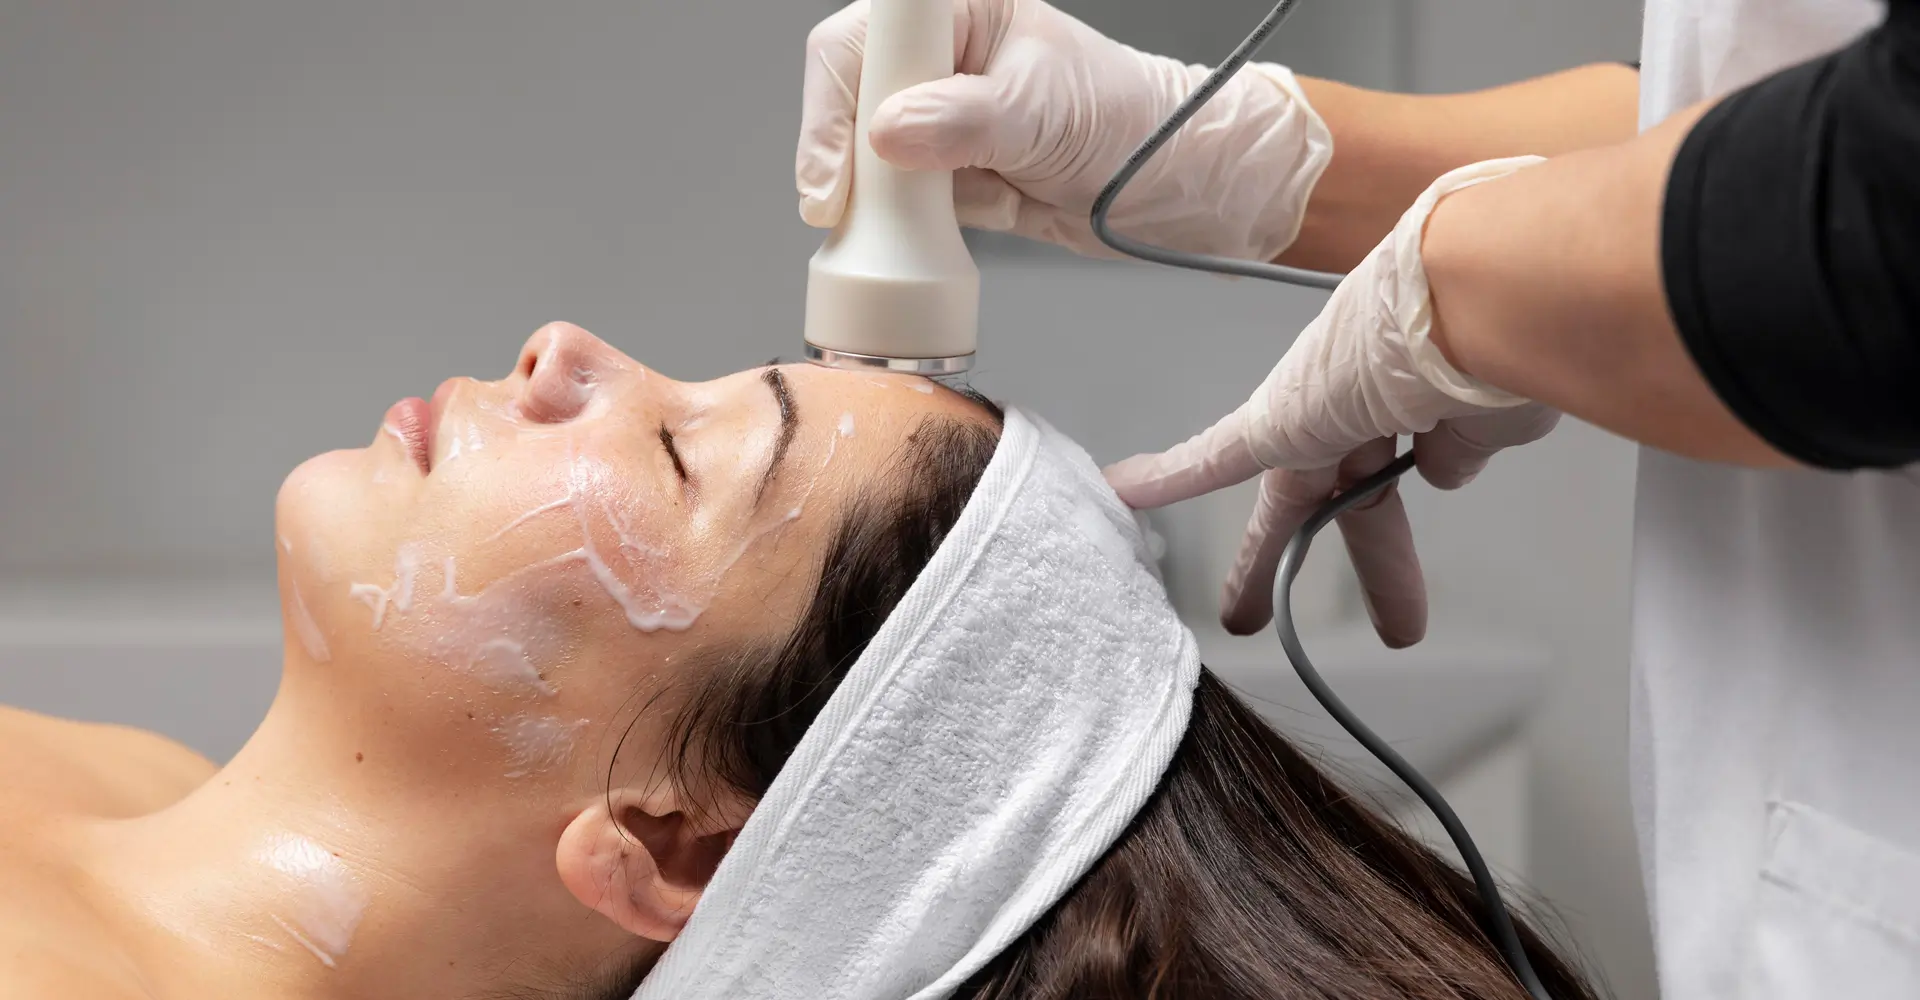 Experience the best Hydrafacial in San Diego at Prophecy Med Spa. Achieve radiant, hydrated skin with our personalized treatments. Book now for rejuvenated skin!